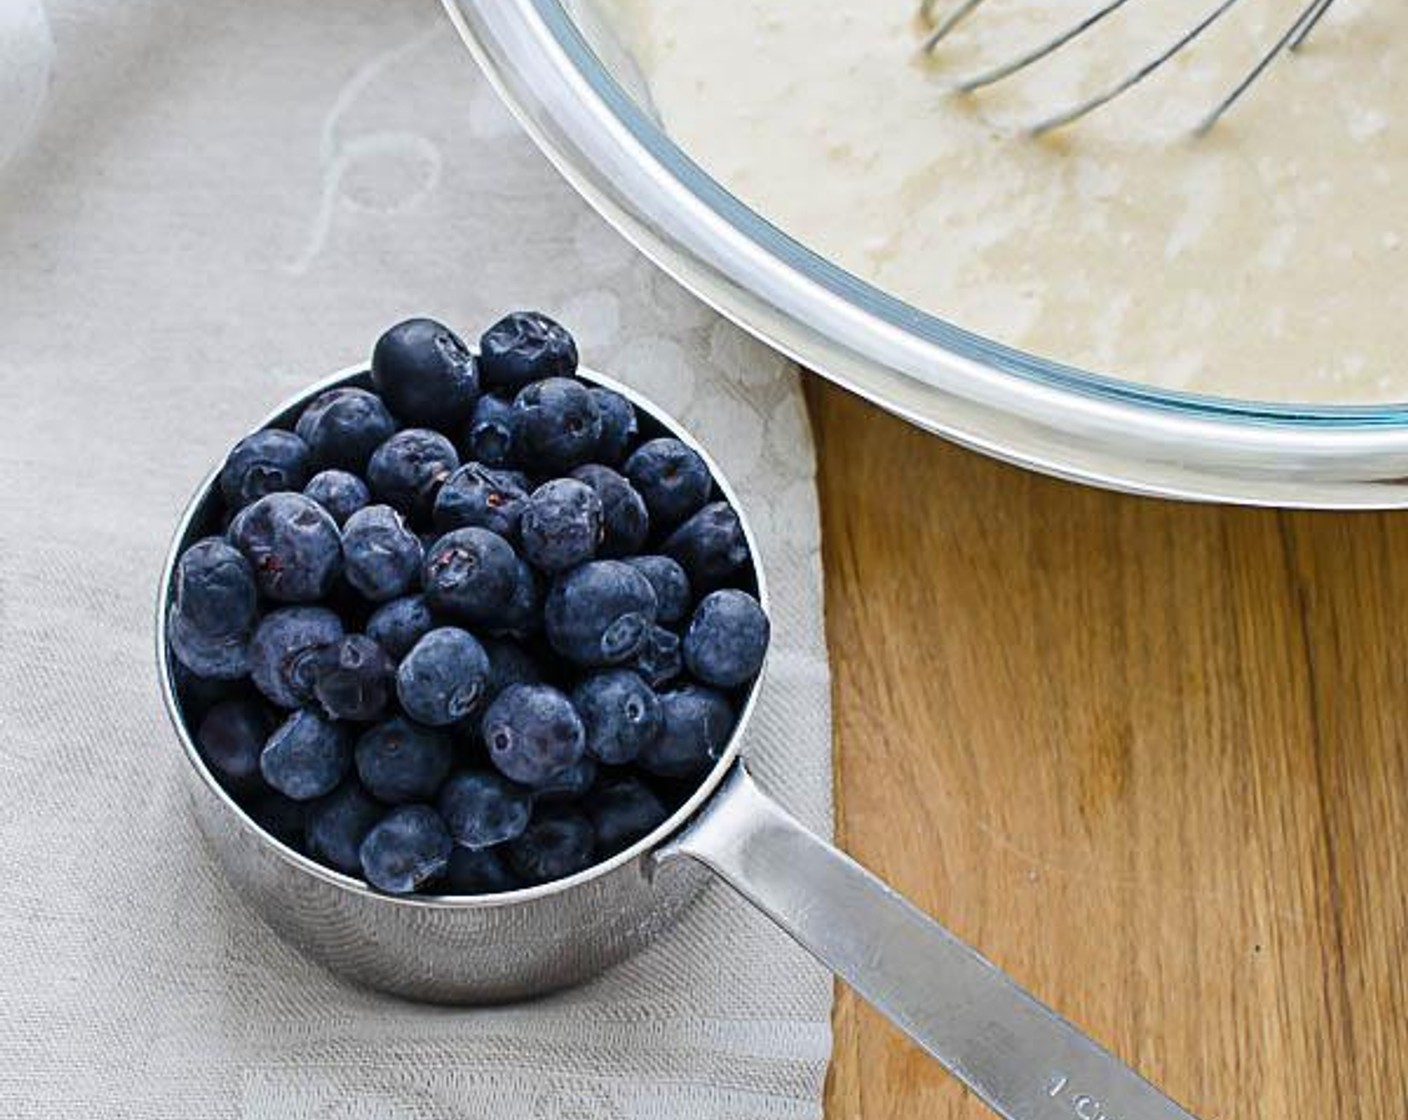 step 3 In a medium bowl whisk together the Egg (1), Milk (1/2 cup), Vanilla Extract (1 tsp), and Butter (2 Tbsp) Stir in the flour mixture just until moistened. Stir in the Fresh Blueberry (1 cup) and set aside.